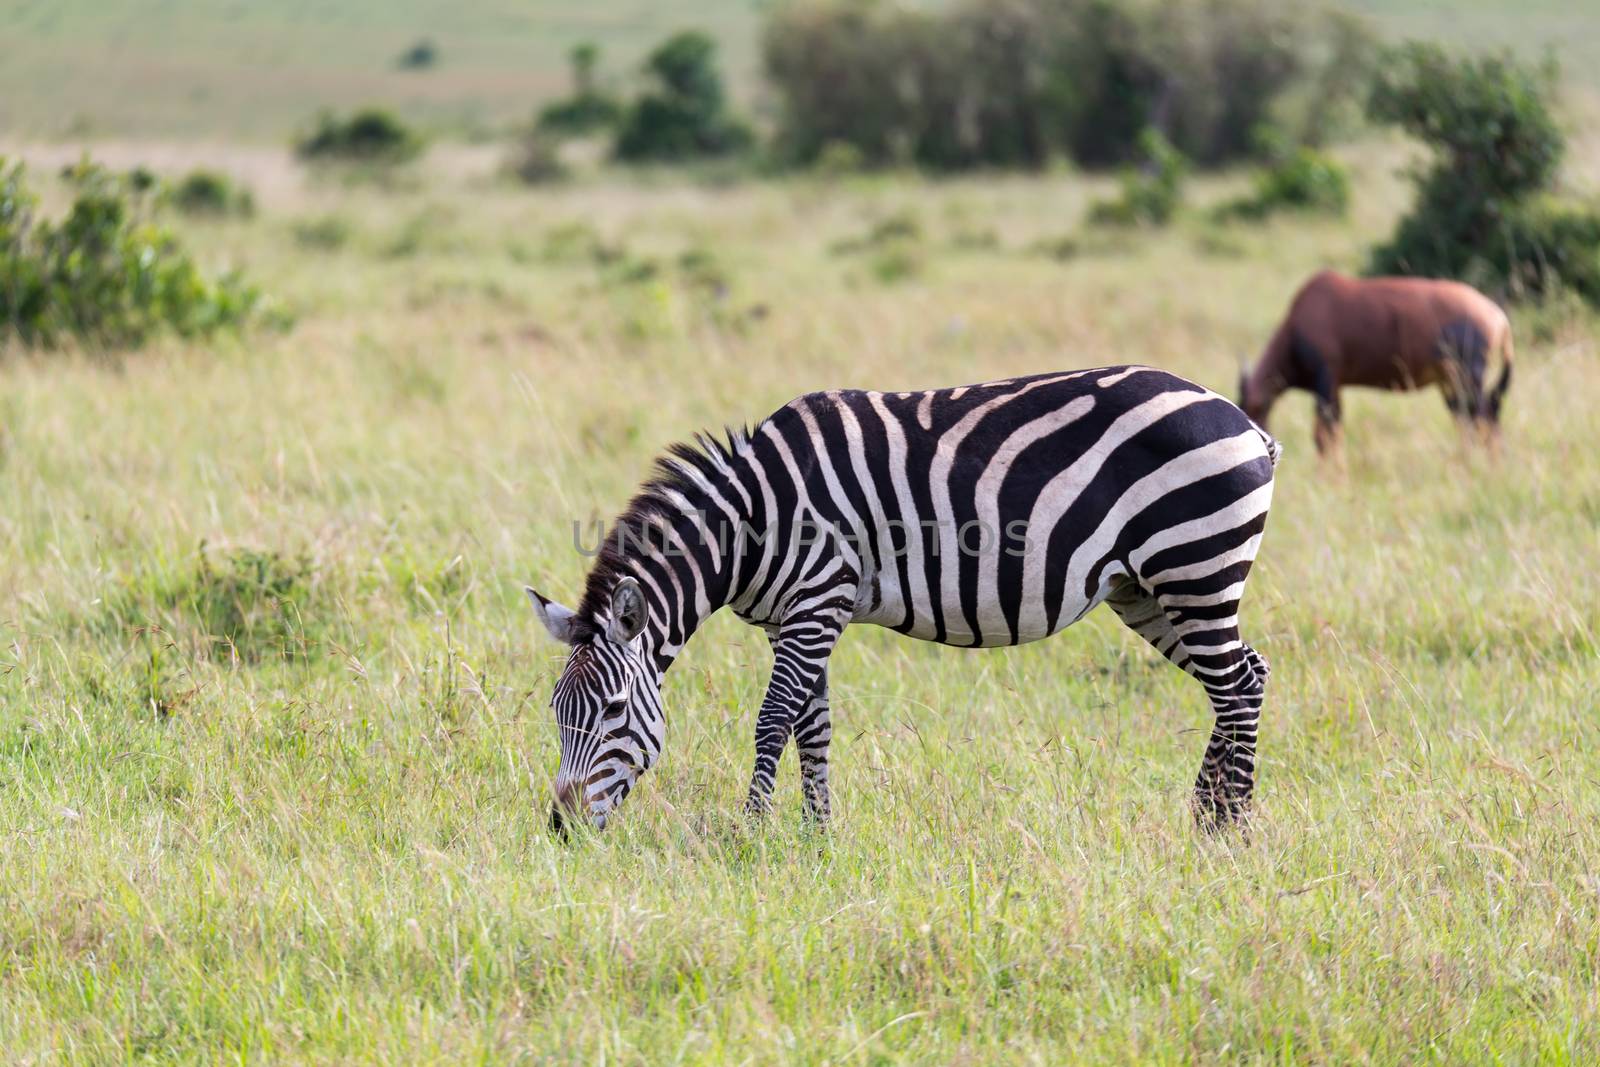 The Zebra family grazes in the savanna in close proximity to other animals